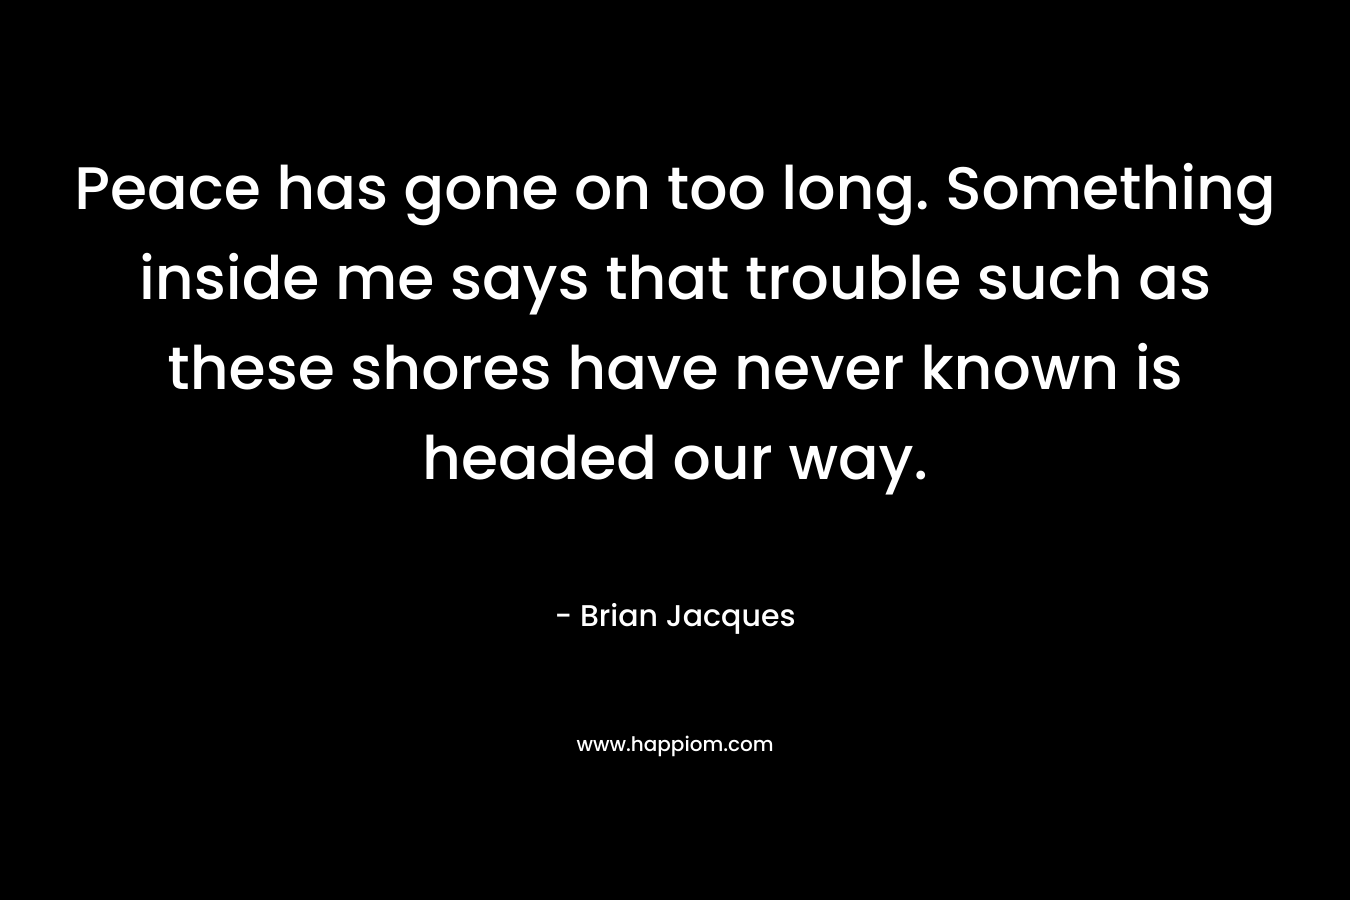 Peace has gone on too long. Something inside me says that trouble such as these shores have never known is headed our way. – Brian Jacques